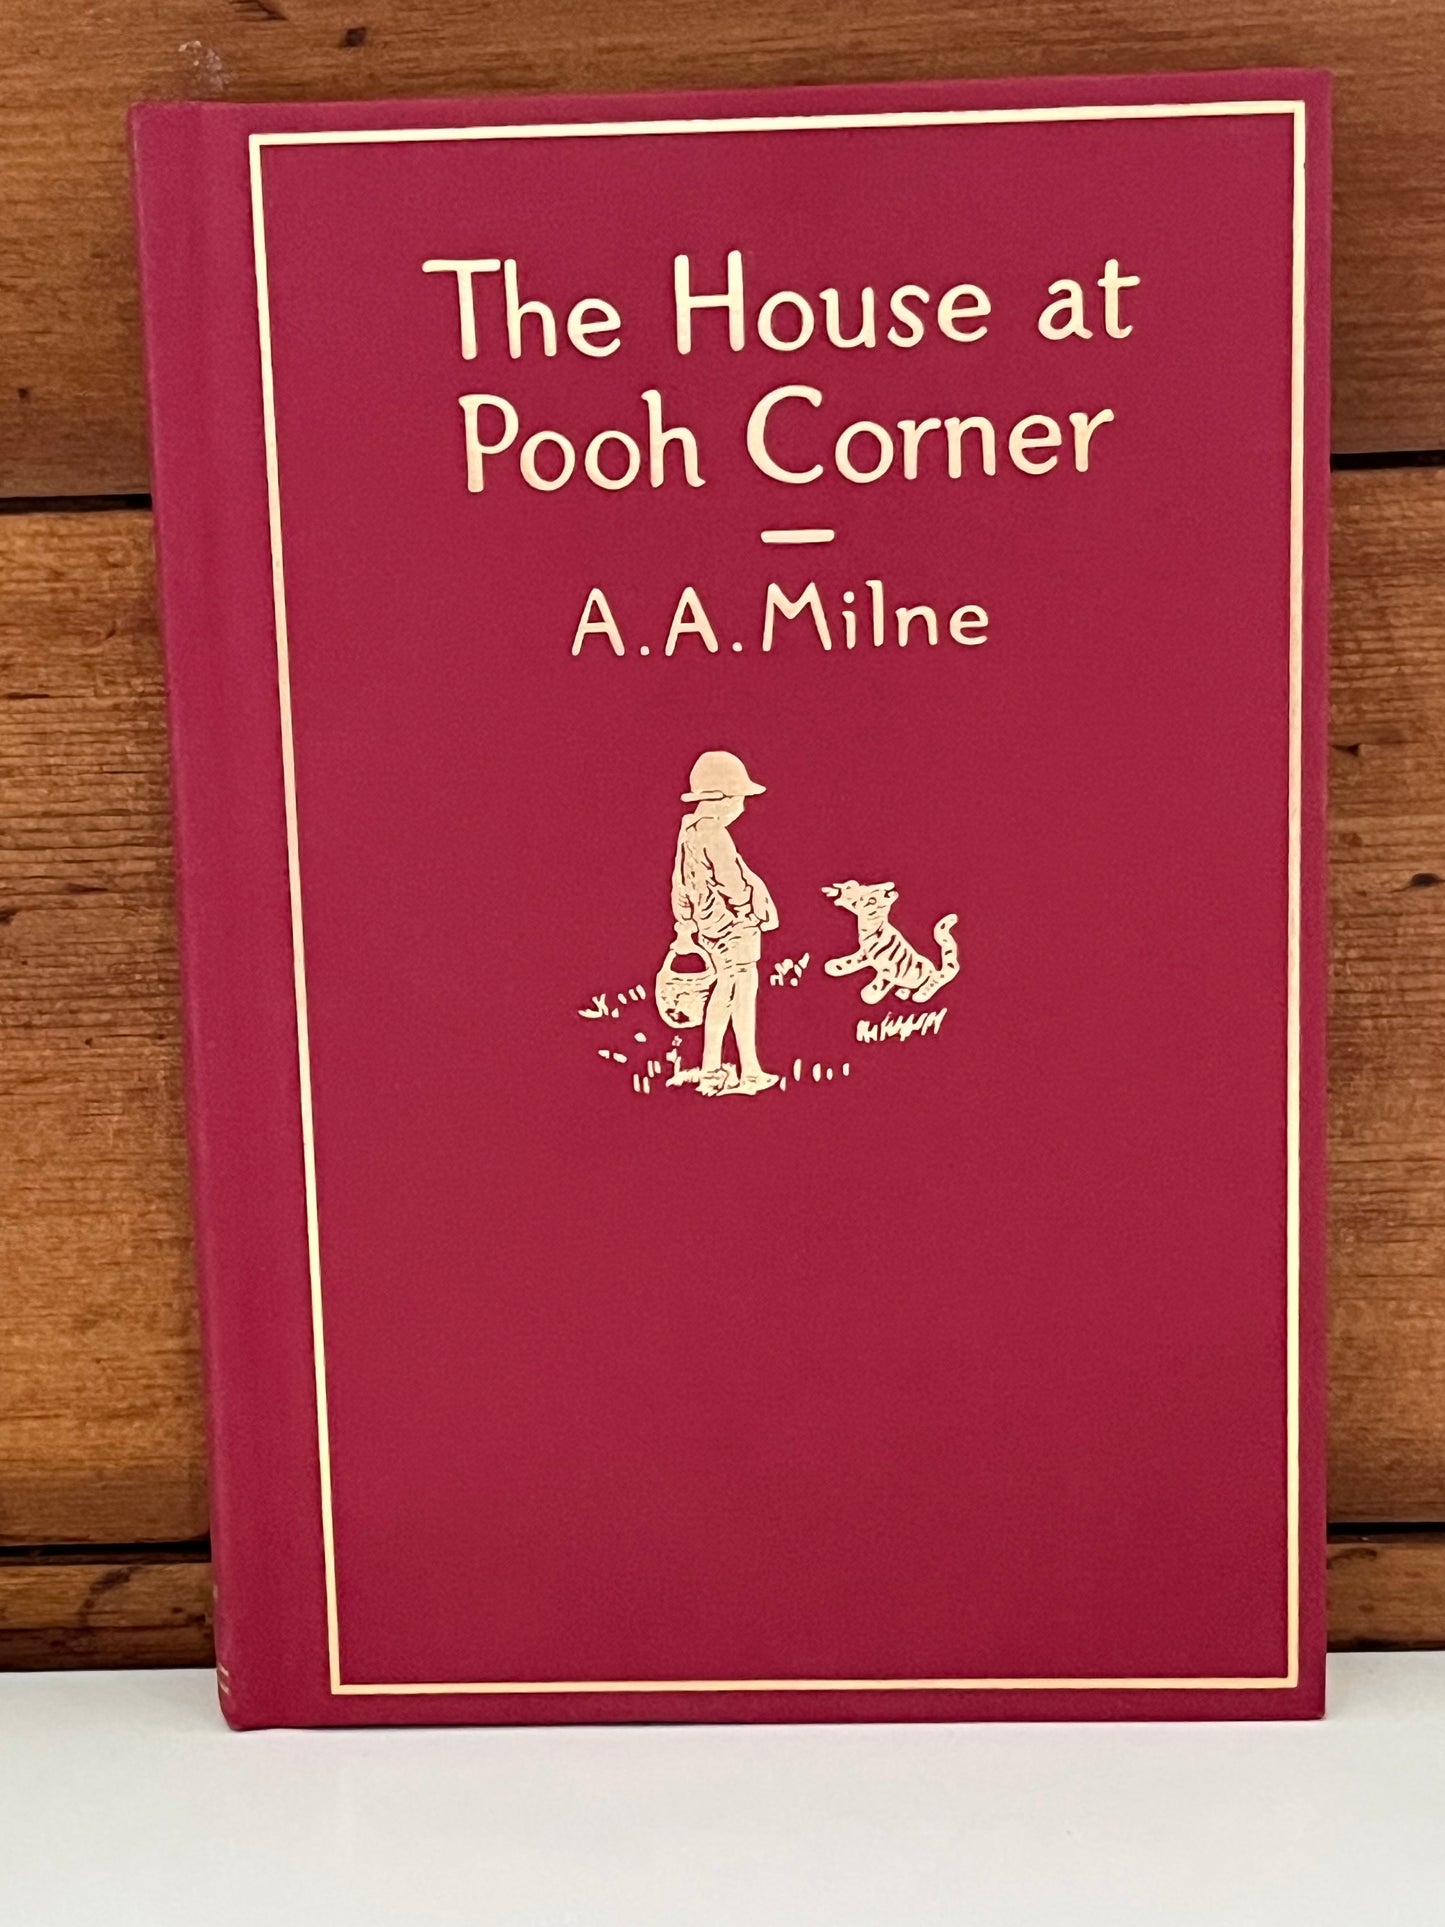 Chapter Book for Young Readers - WINNIE-THE-POOH COLLECTION, 4 Titles to choose from!